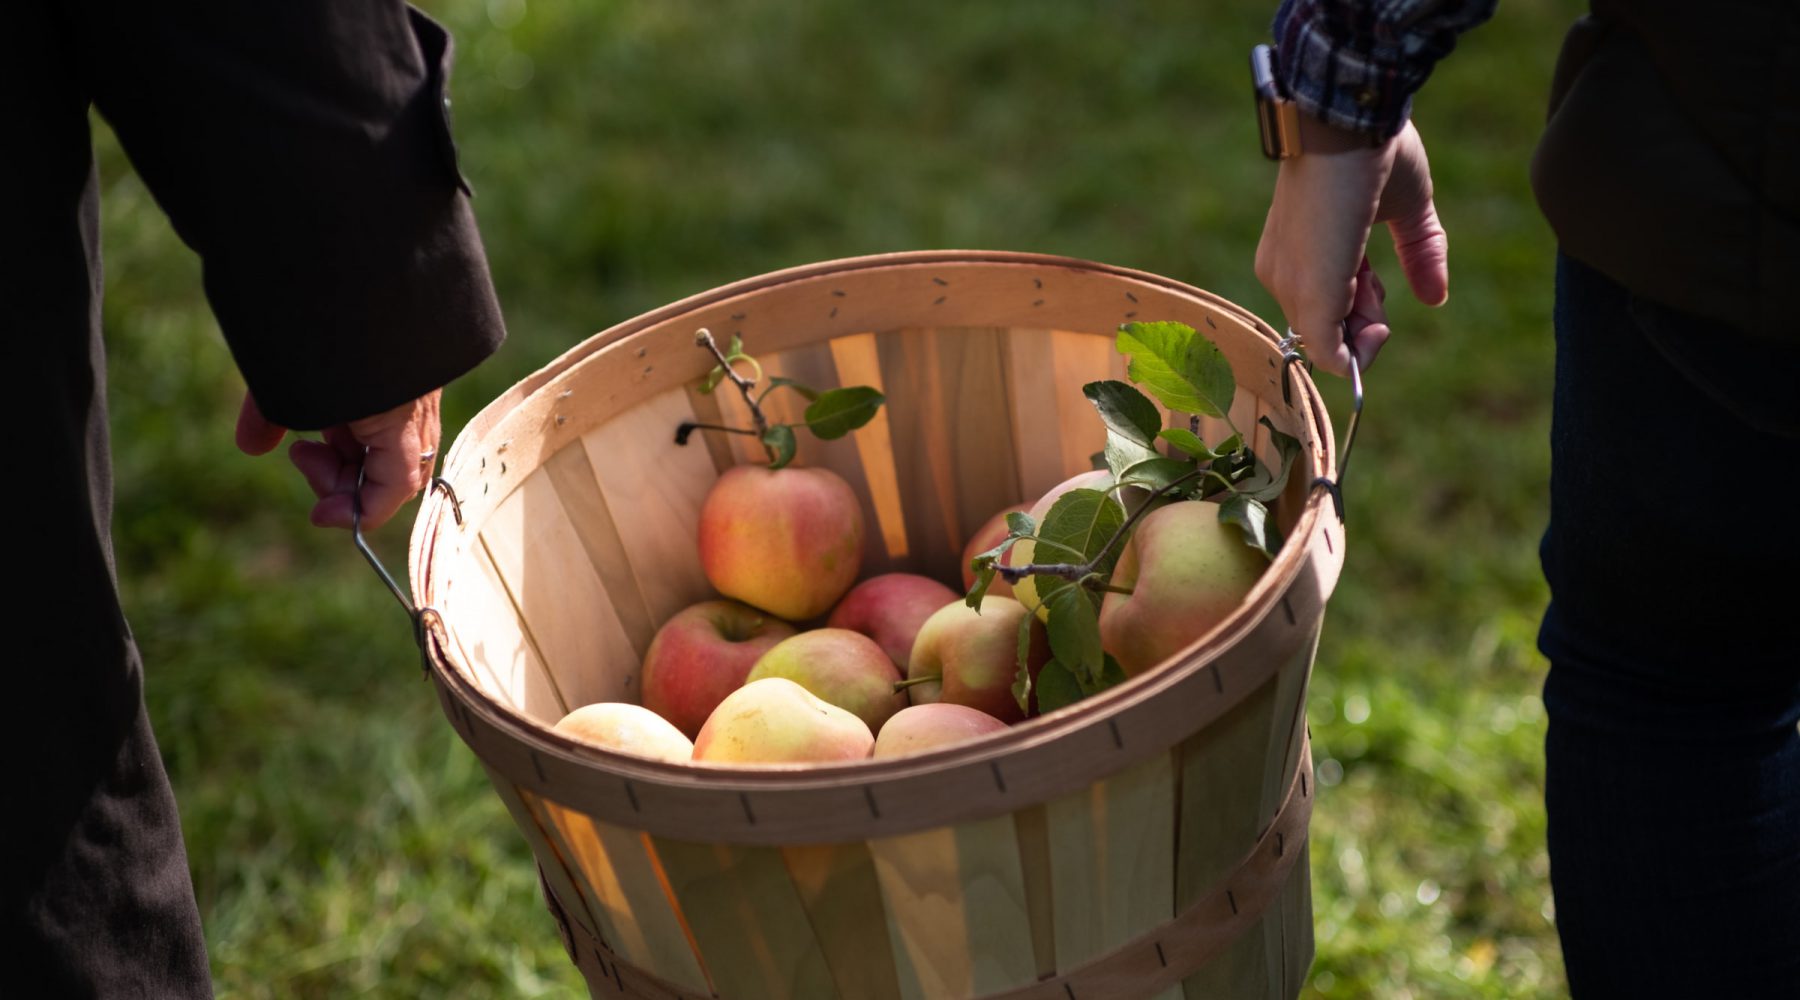 A basket of apples carried by two people